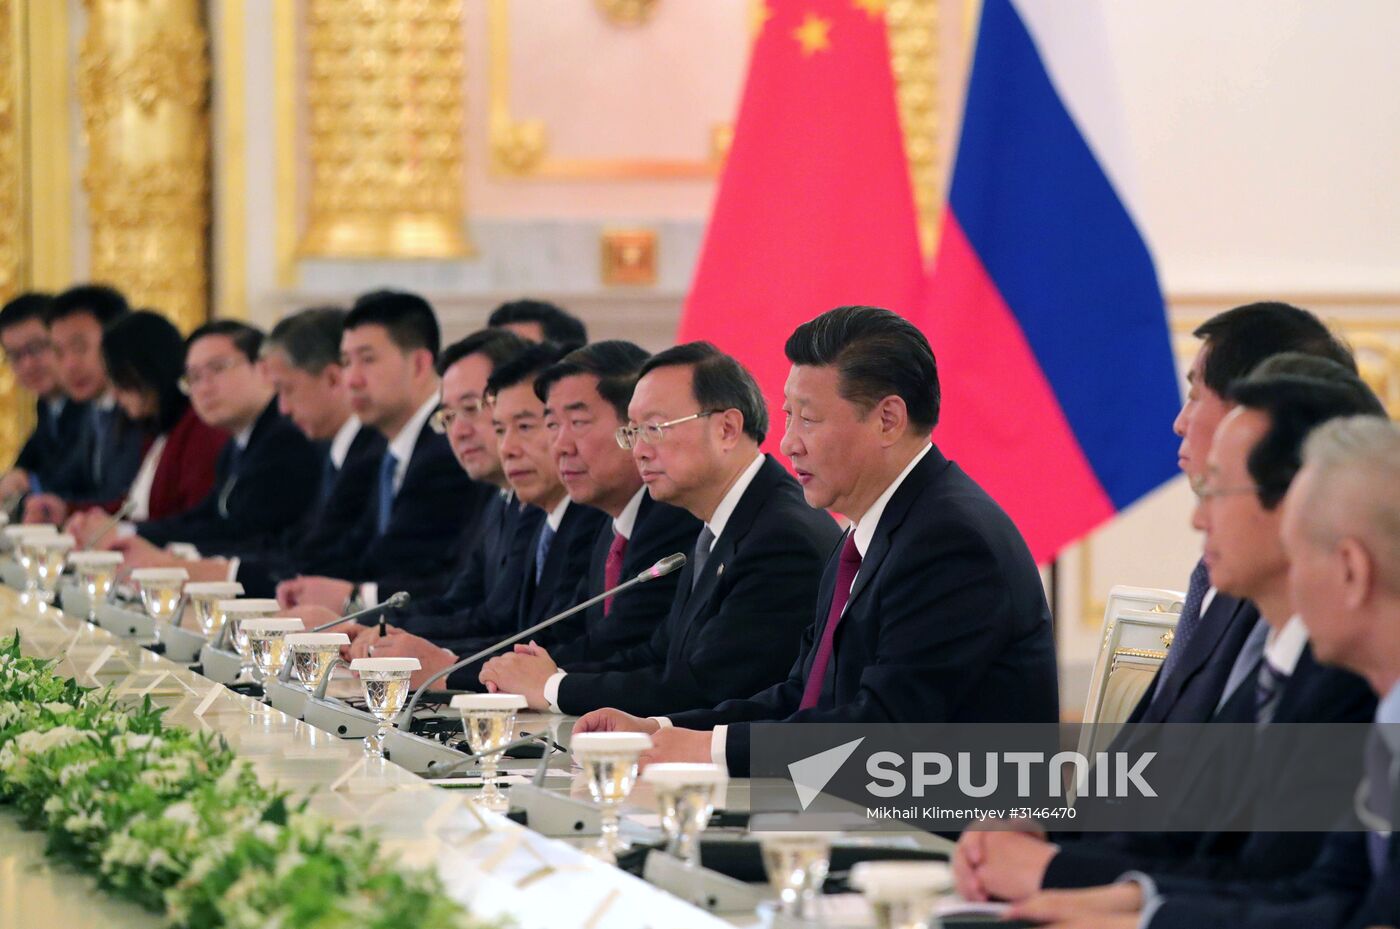 Vladimir Putin meets with Xi Jinping in Moscow